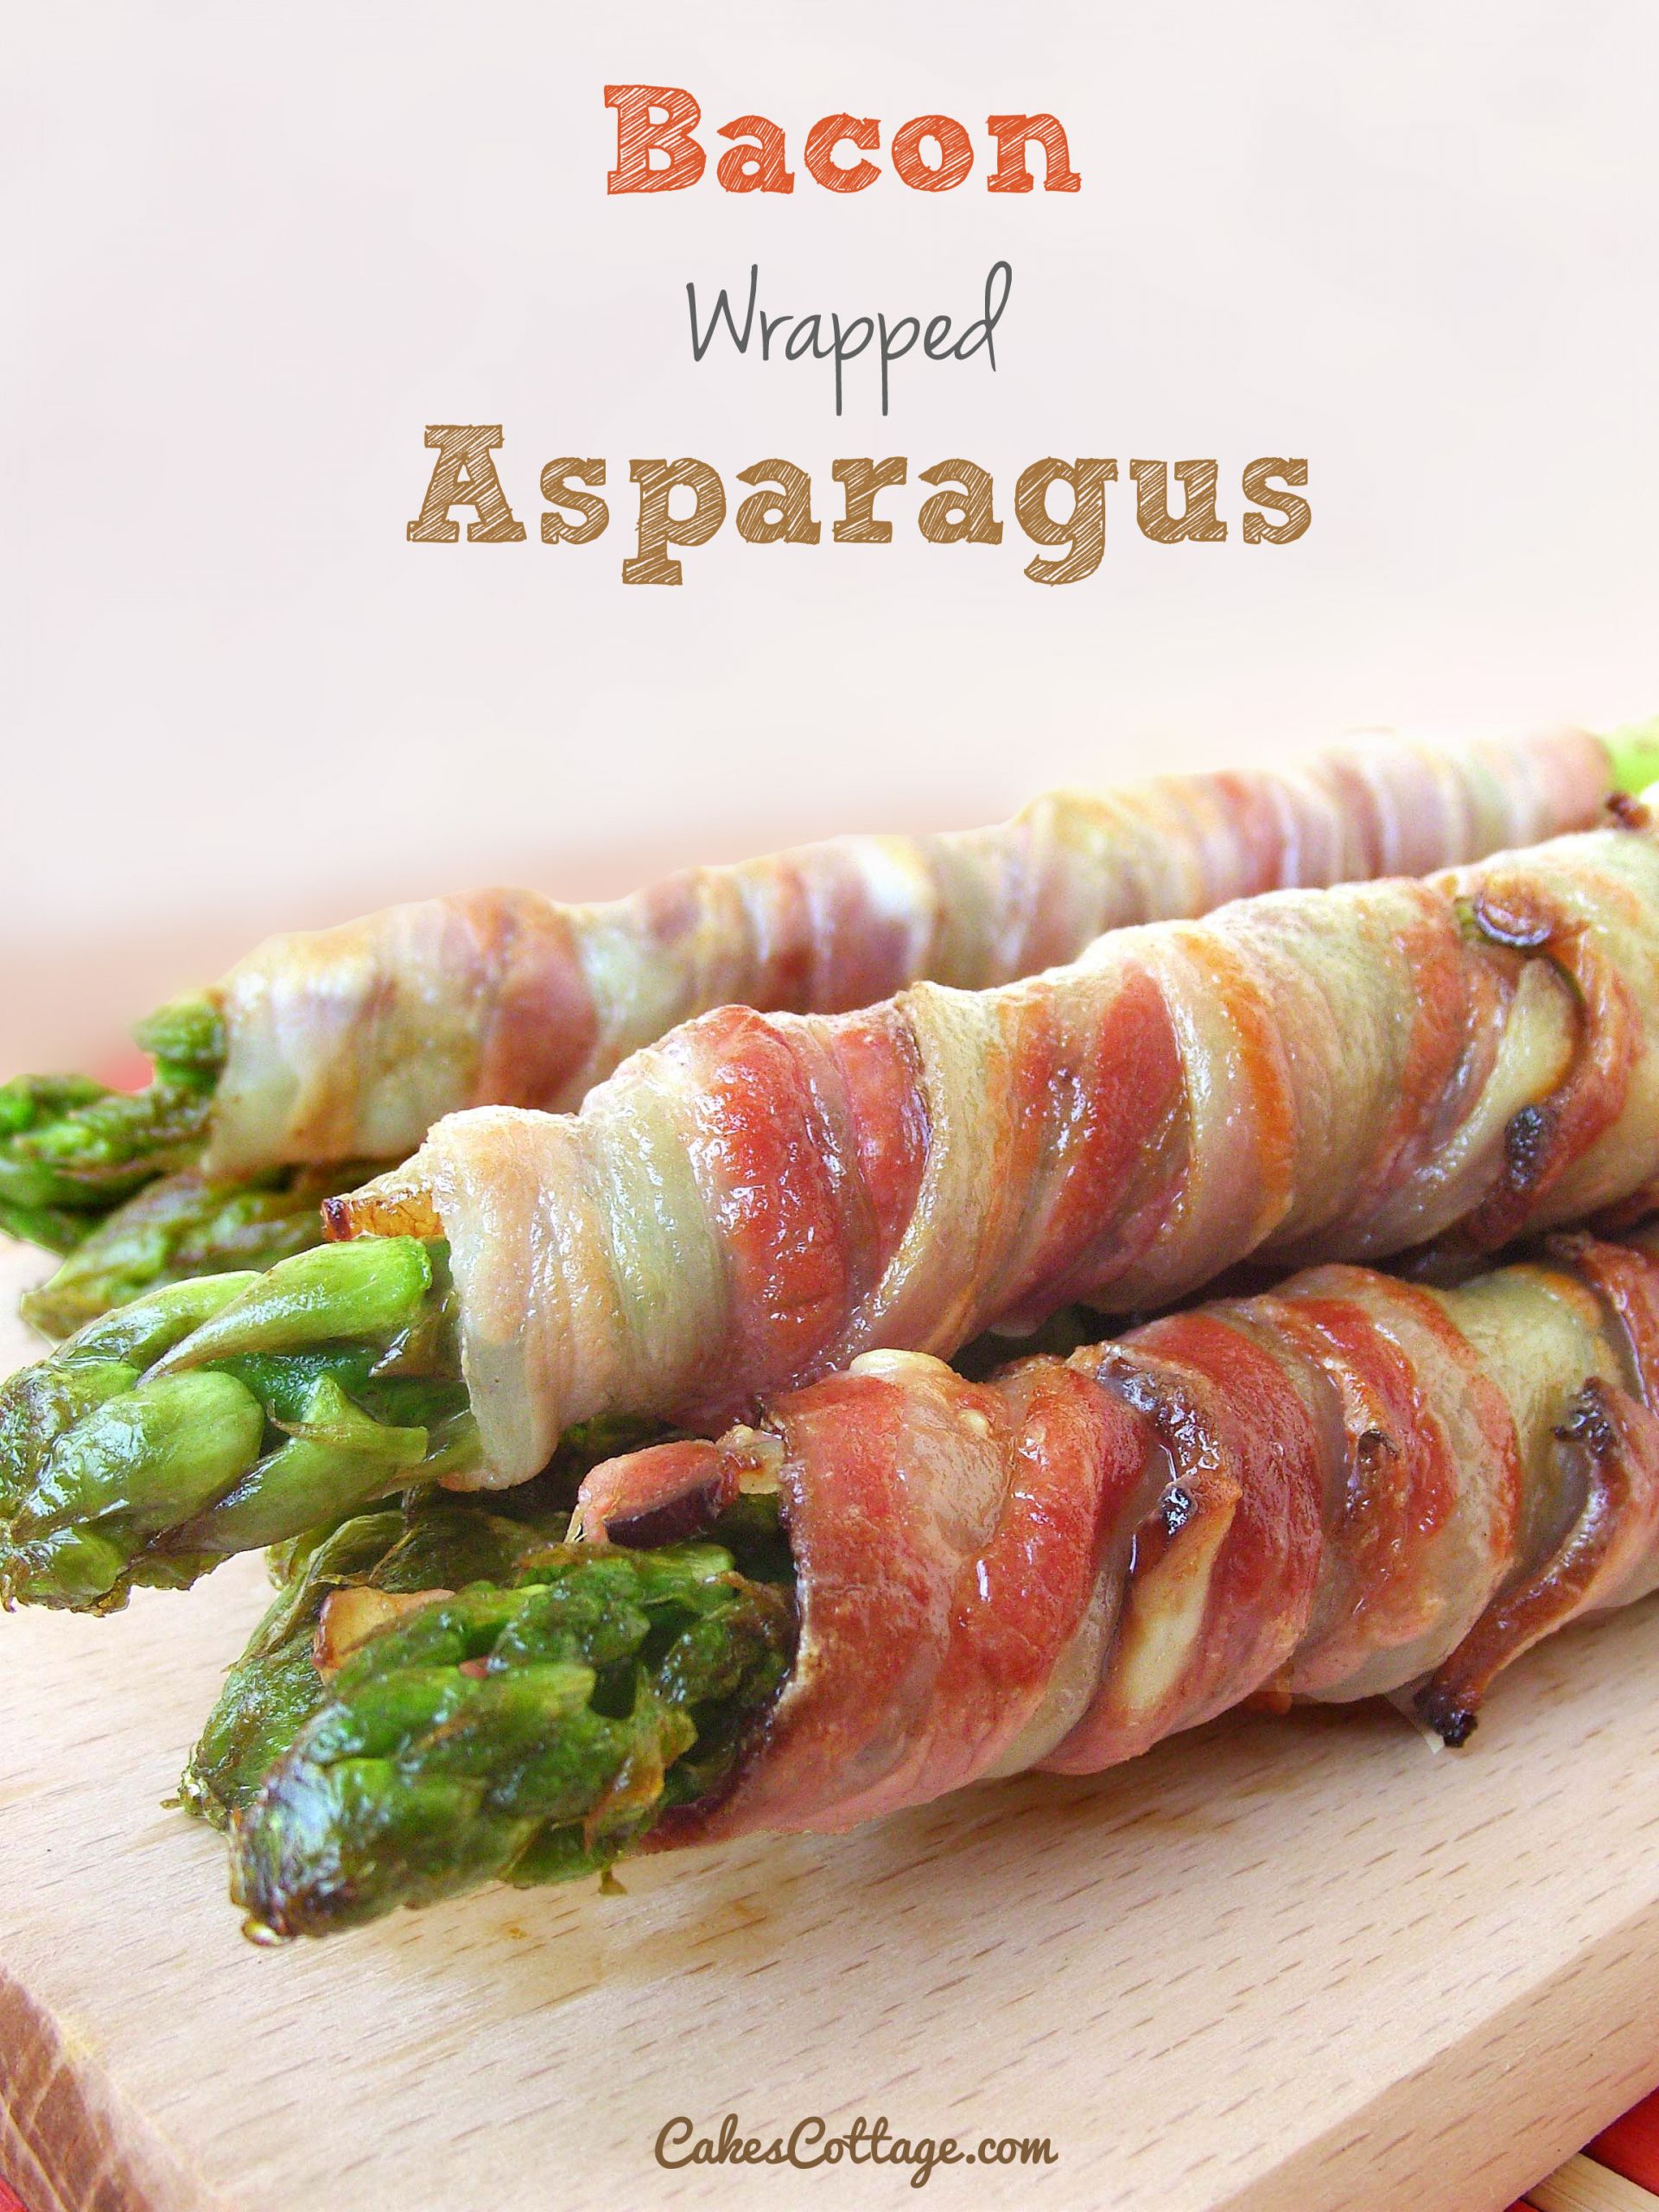 Bacon Wrapped Asparagus Appetizers
 Bacon Wrapped Asparagus Cakescottage